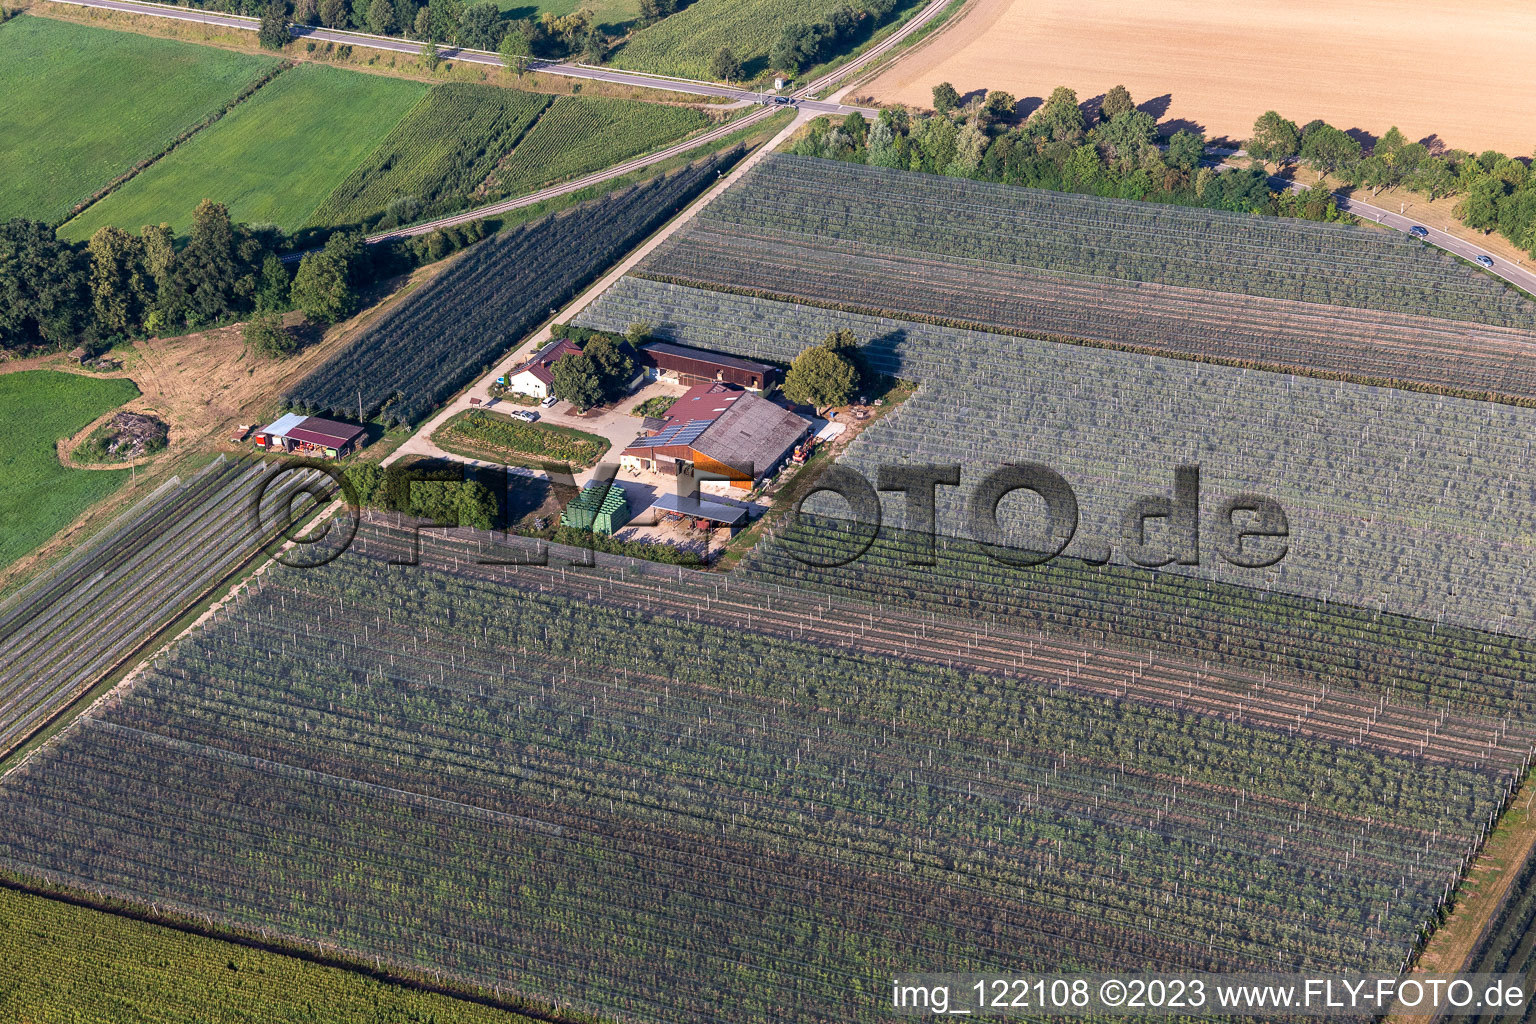 Aerial view of Asparagus and Obsthof Gensheimer in Steinweiler in the state Rhineland-Palatinate, Germany